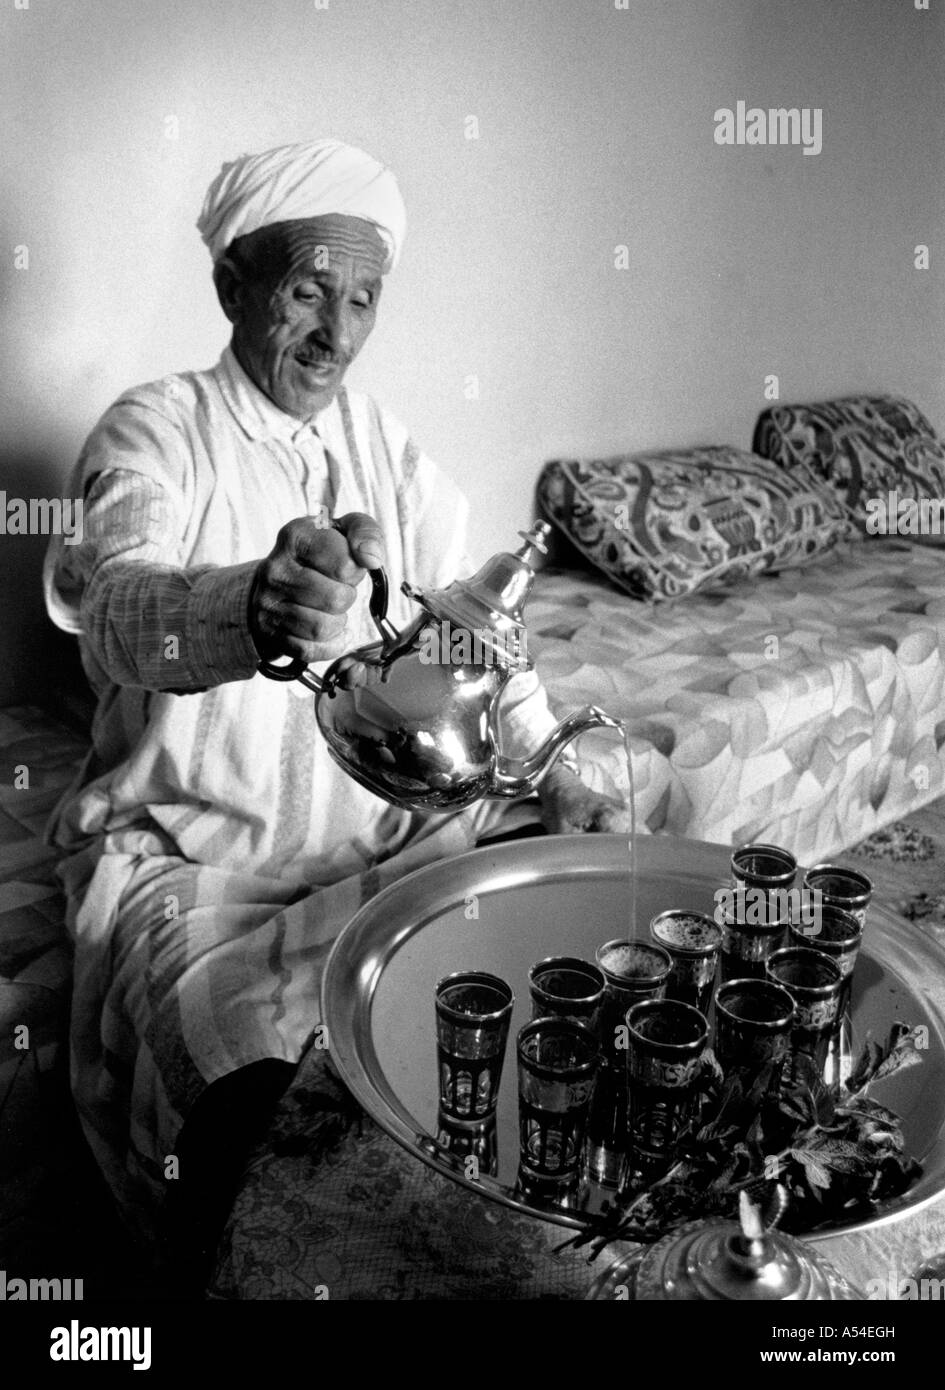 Painet hn2006 651 black and white food man pouring mint tea tiznit morocco country developing nation less economically Stock Photo